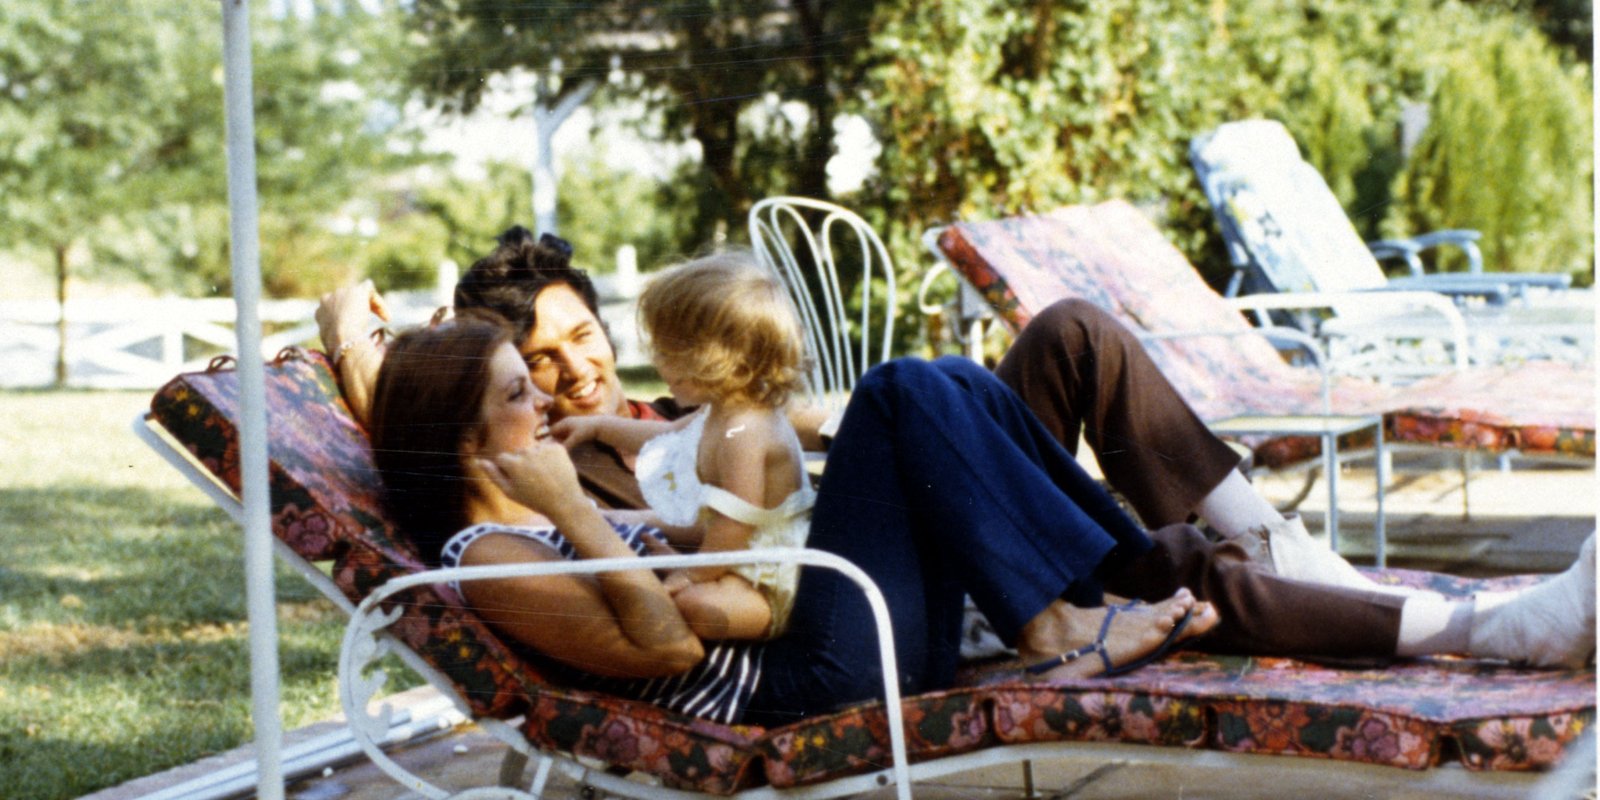 Elvis Presley, wife Priscilla and daughter Lisa Marie at the pool area of their Graceland home.